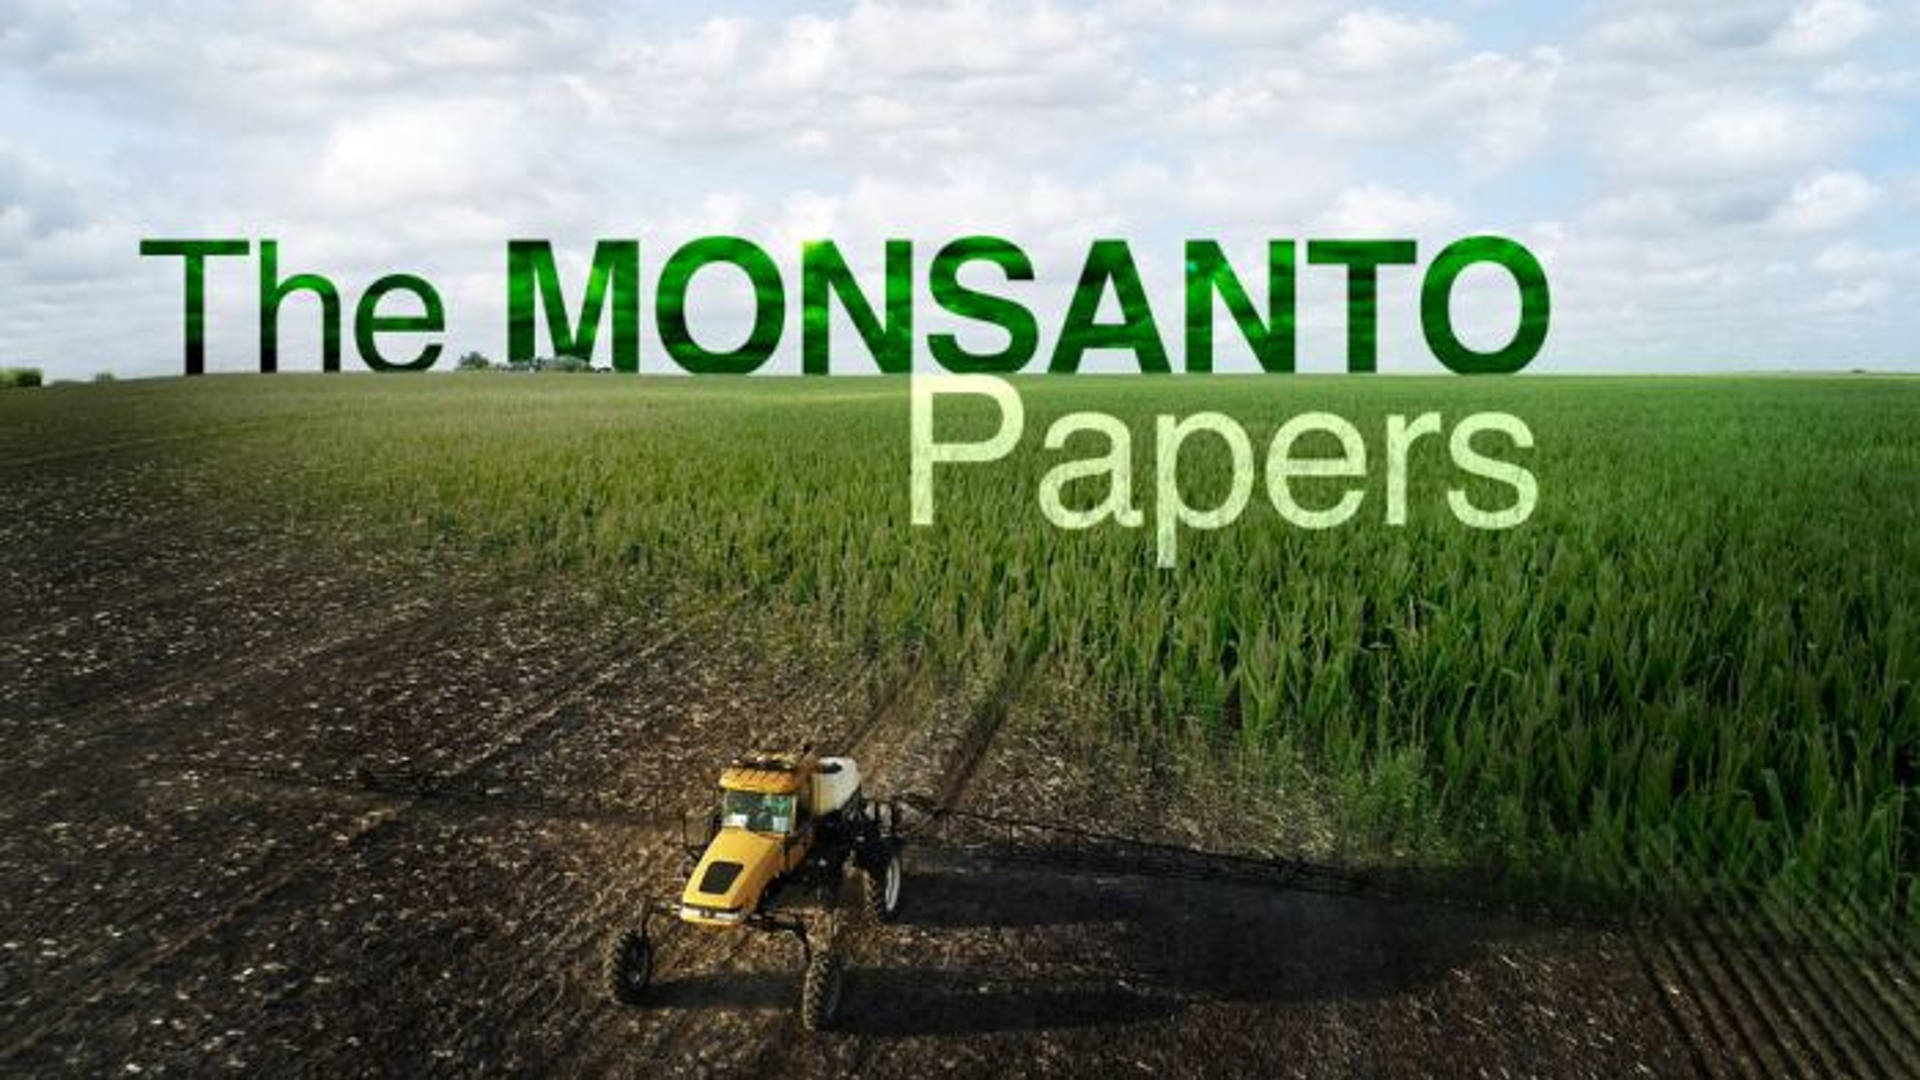 Watch Full Movie - The Monsanto Papers